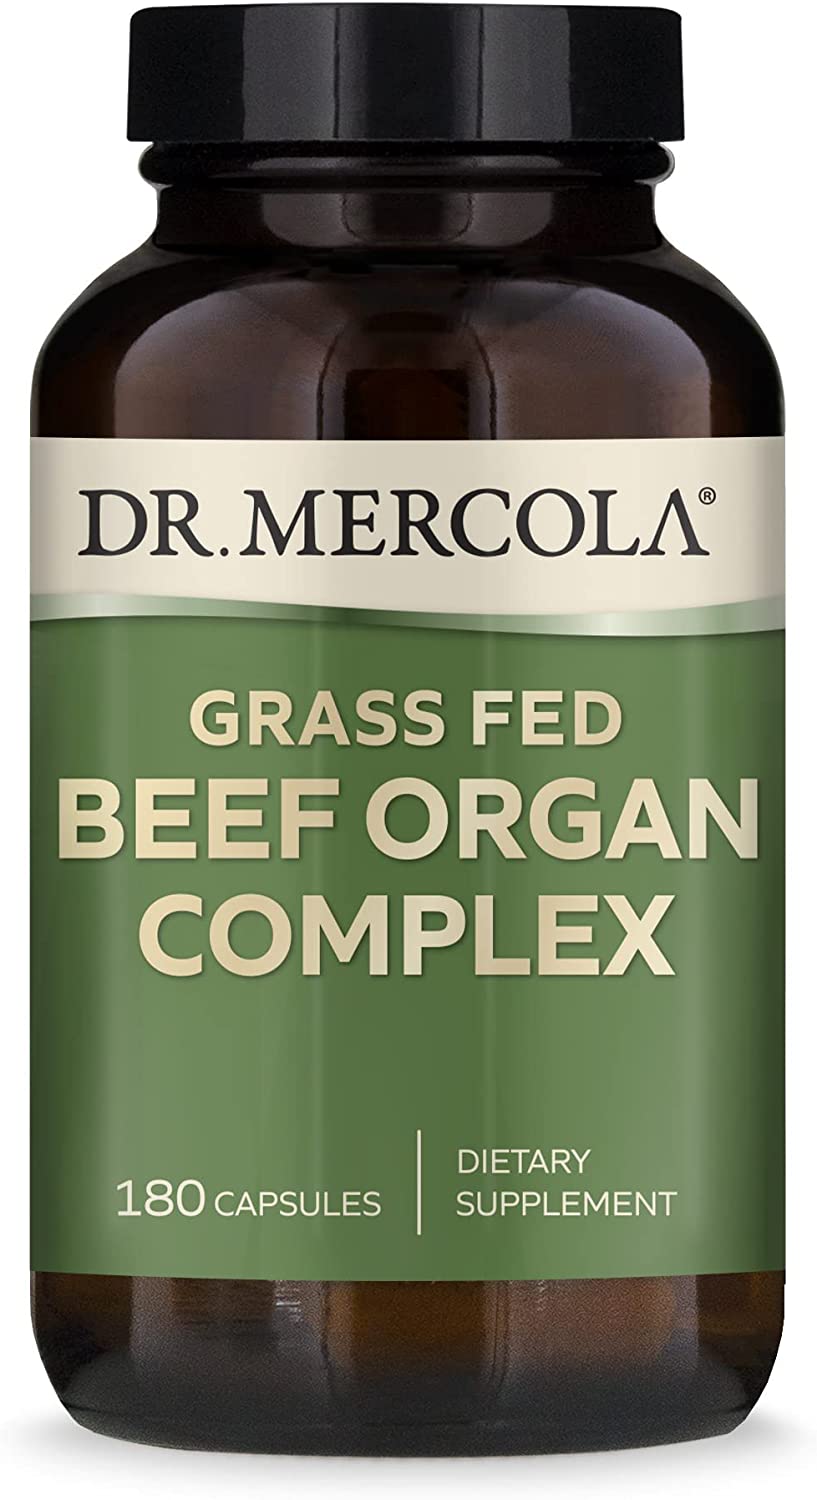 Dr Mercola Grass Fed Beef Organ Complex Dietary Supplement, 30 Servings (180 Capsules), Non GMO, Gluten Free, Soy Free...